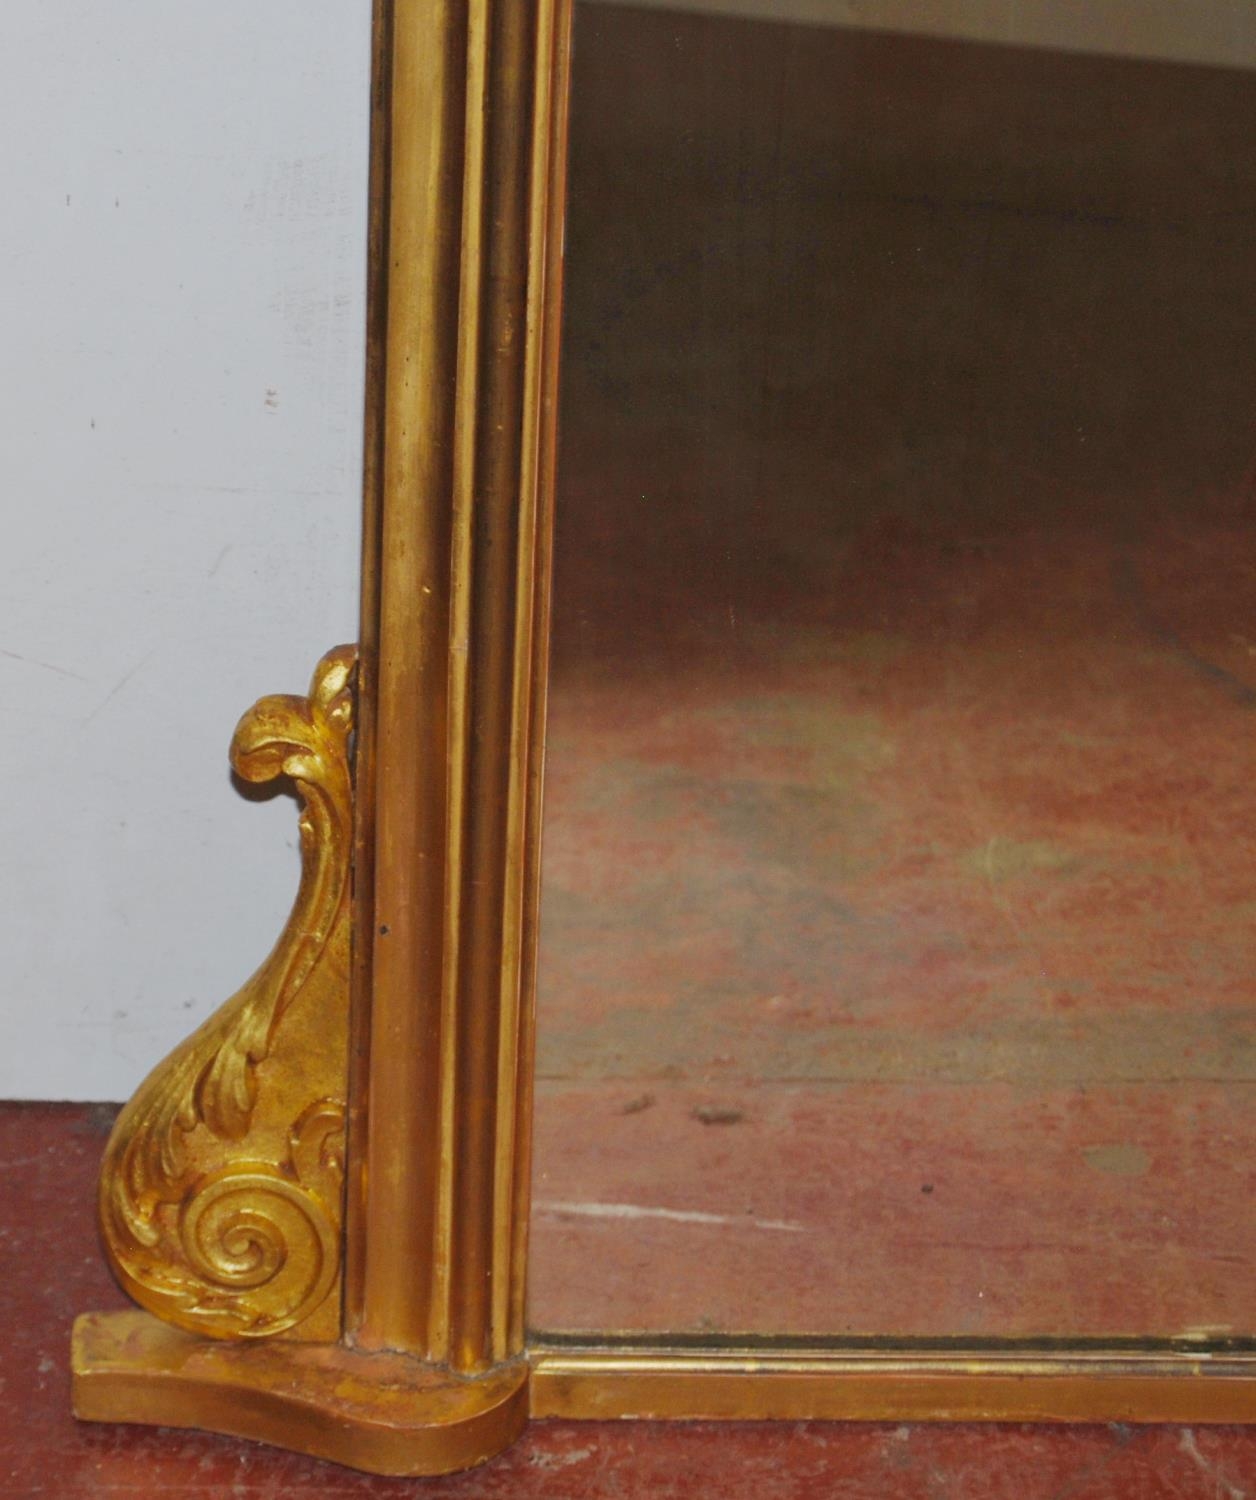 Antique gilt wood overmantel mirror decorated with acanthus and scroll brackets, mirror - Image 3 of 4